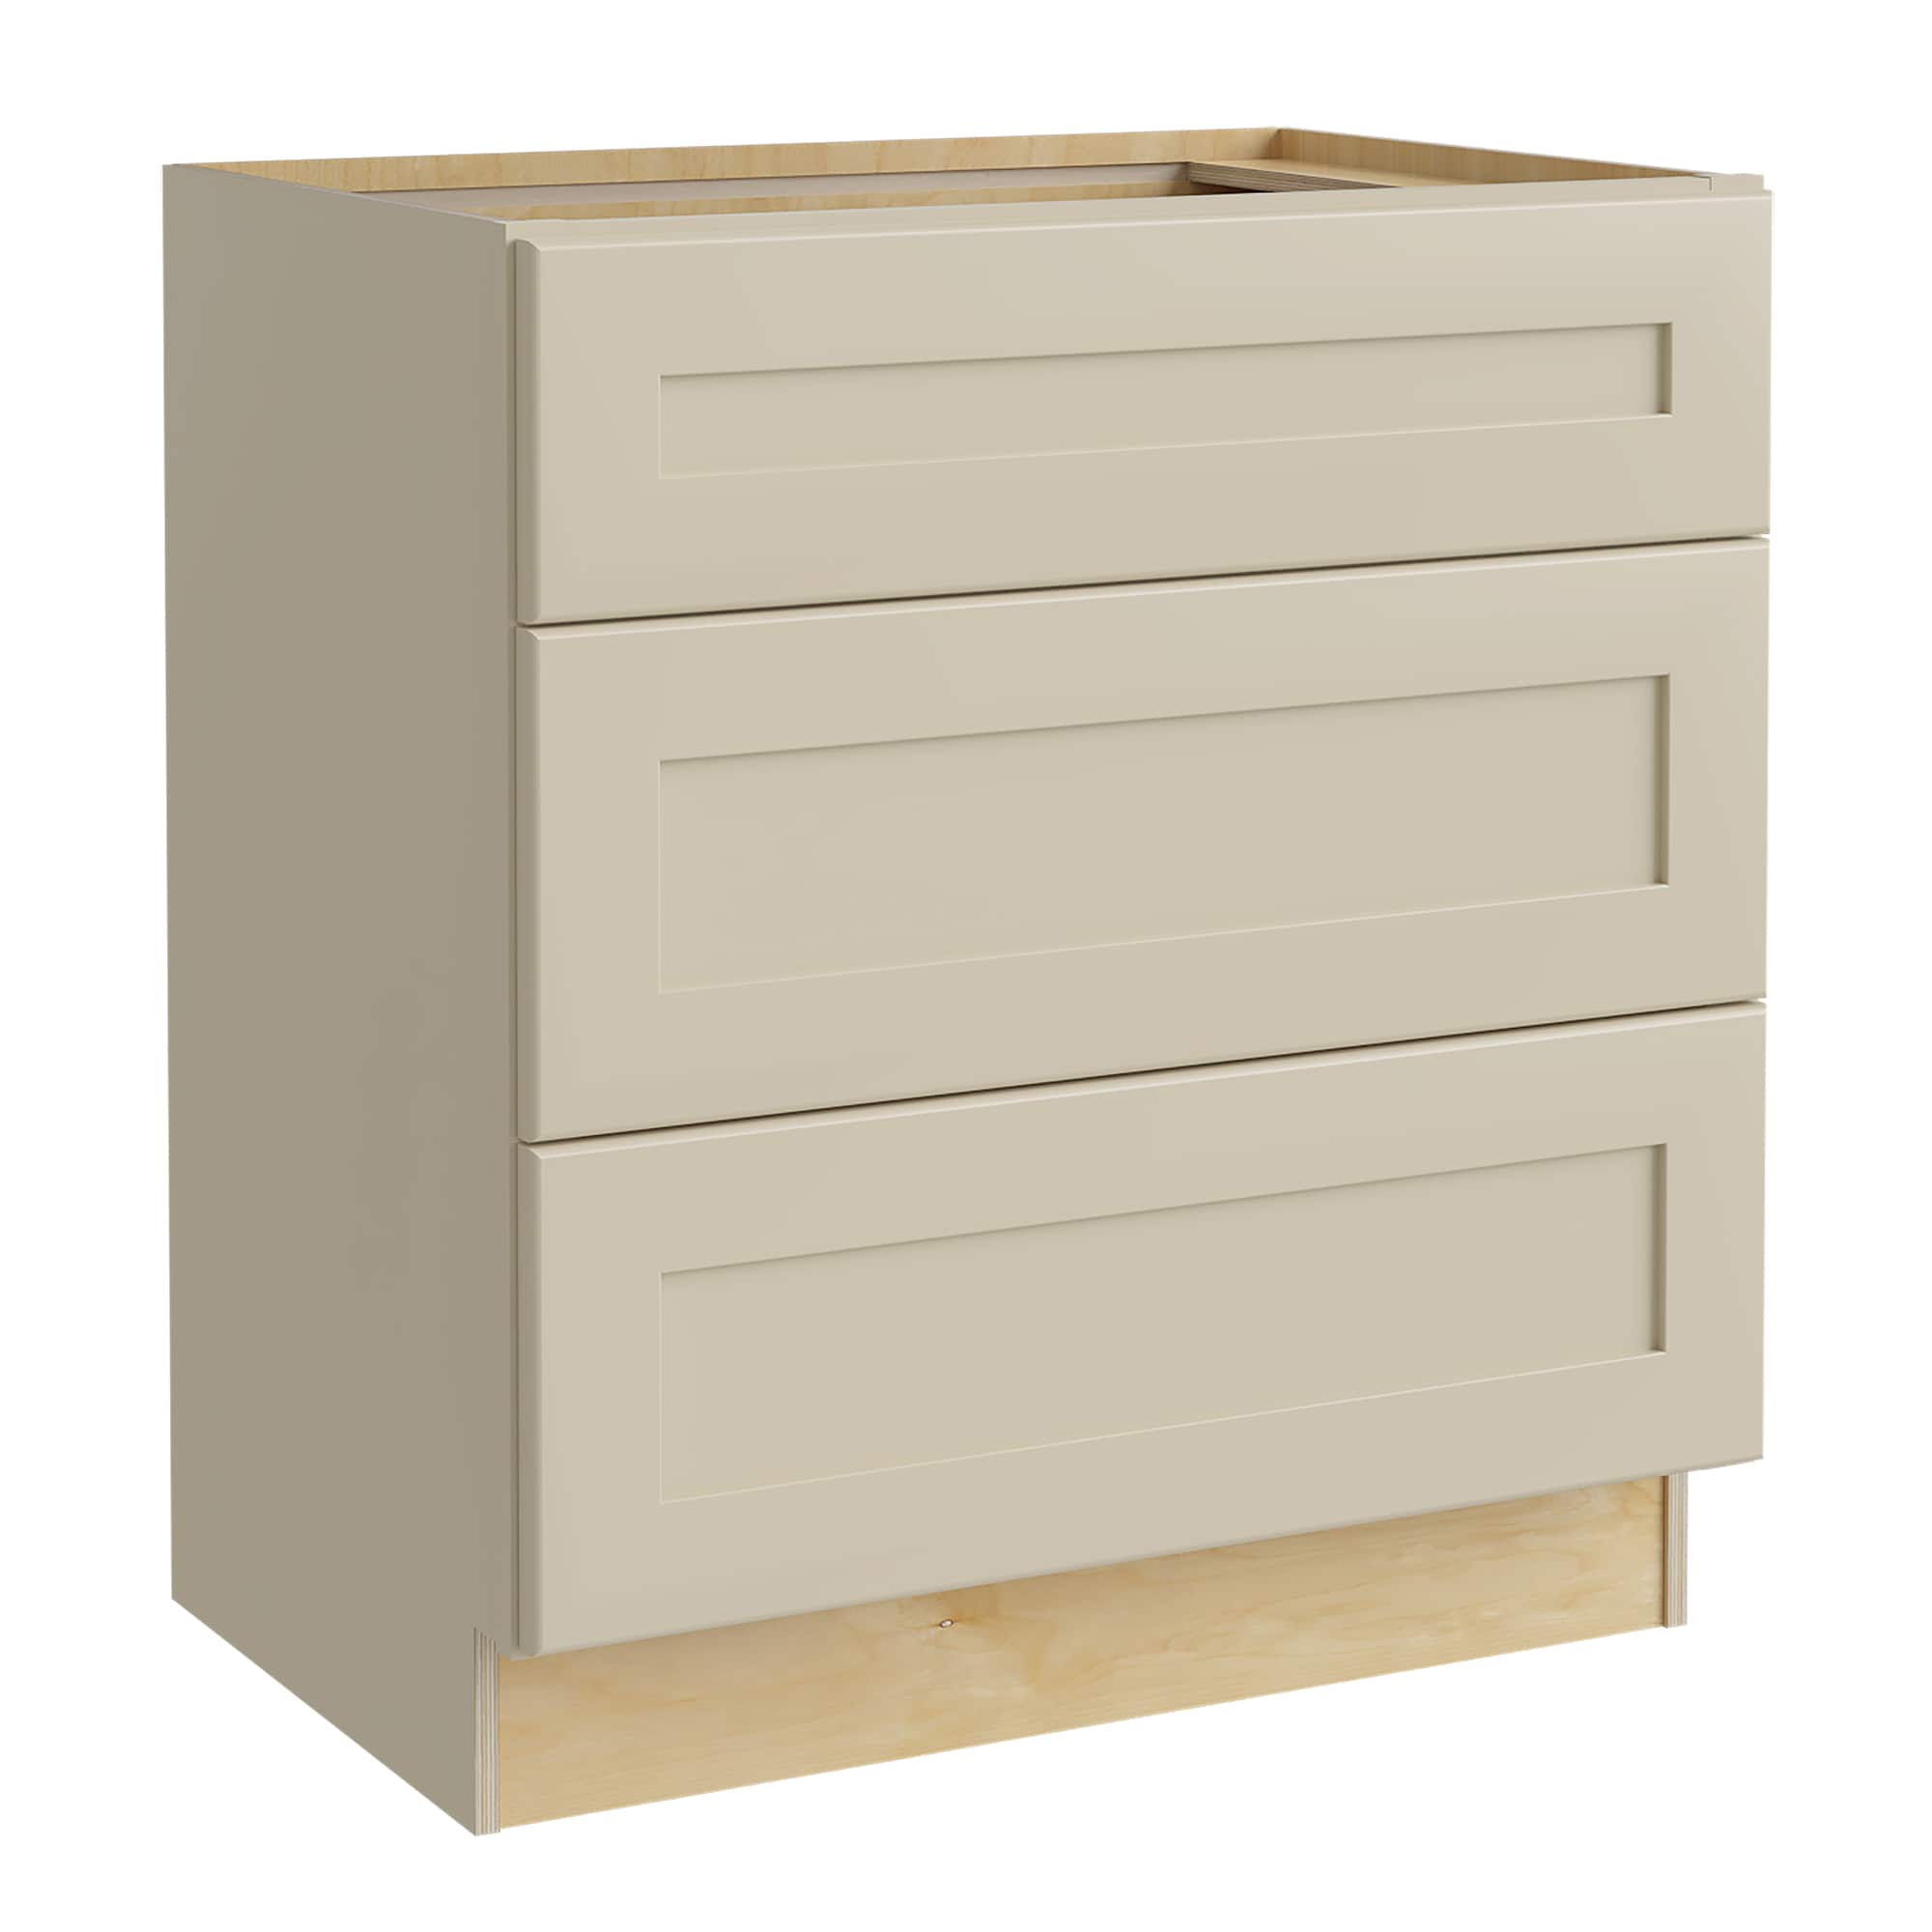 Luxxe Cabinetry 30-in W x 34.5-in H x 24-in D Norfolk Blended Cream Painted Drawer Base Fully Assembled Semi-custom Cabinet in Off-White | BCT30-NBC